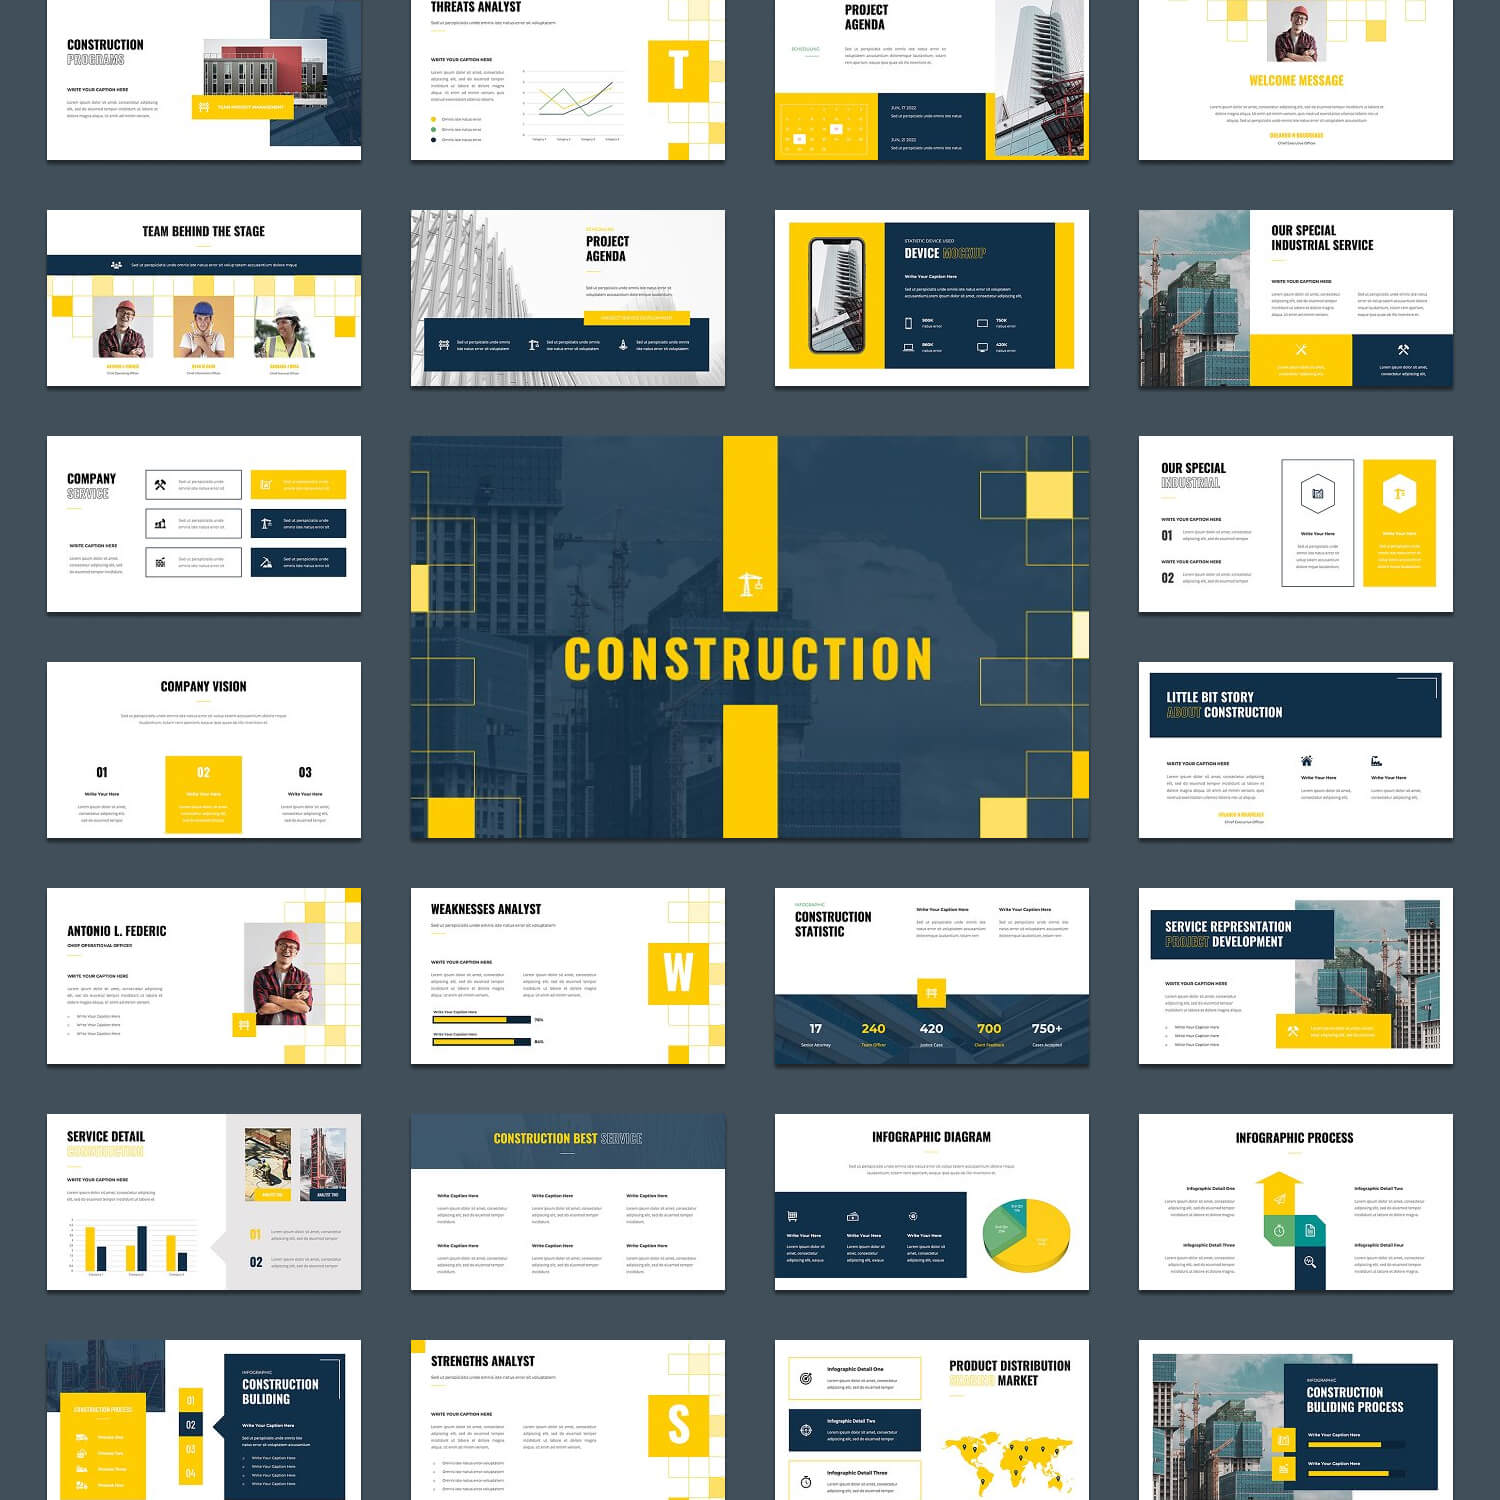 Lots of construction powerpoint templates in blue-white-yellow colors on a gray background.